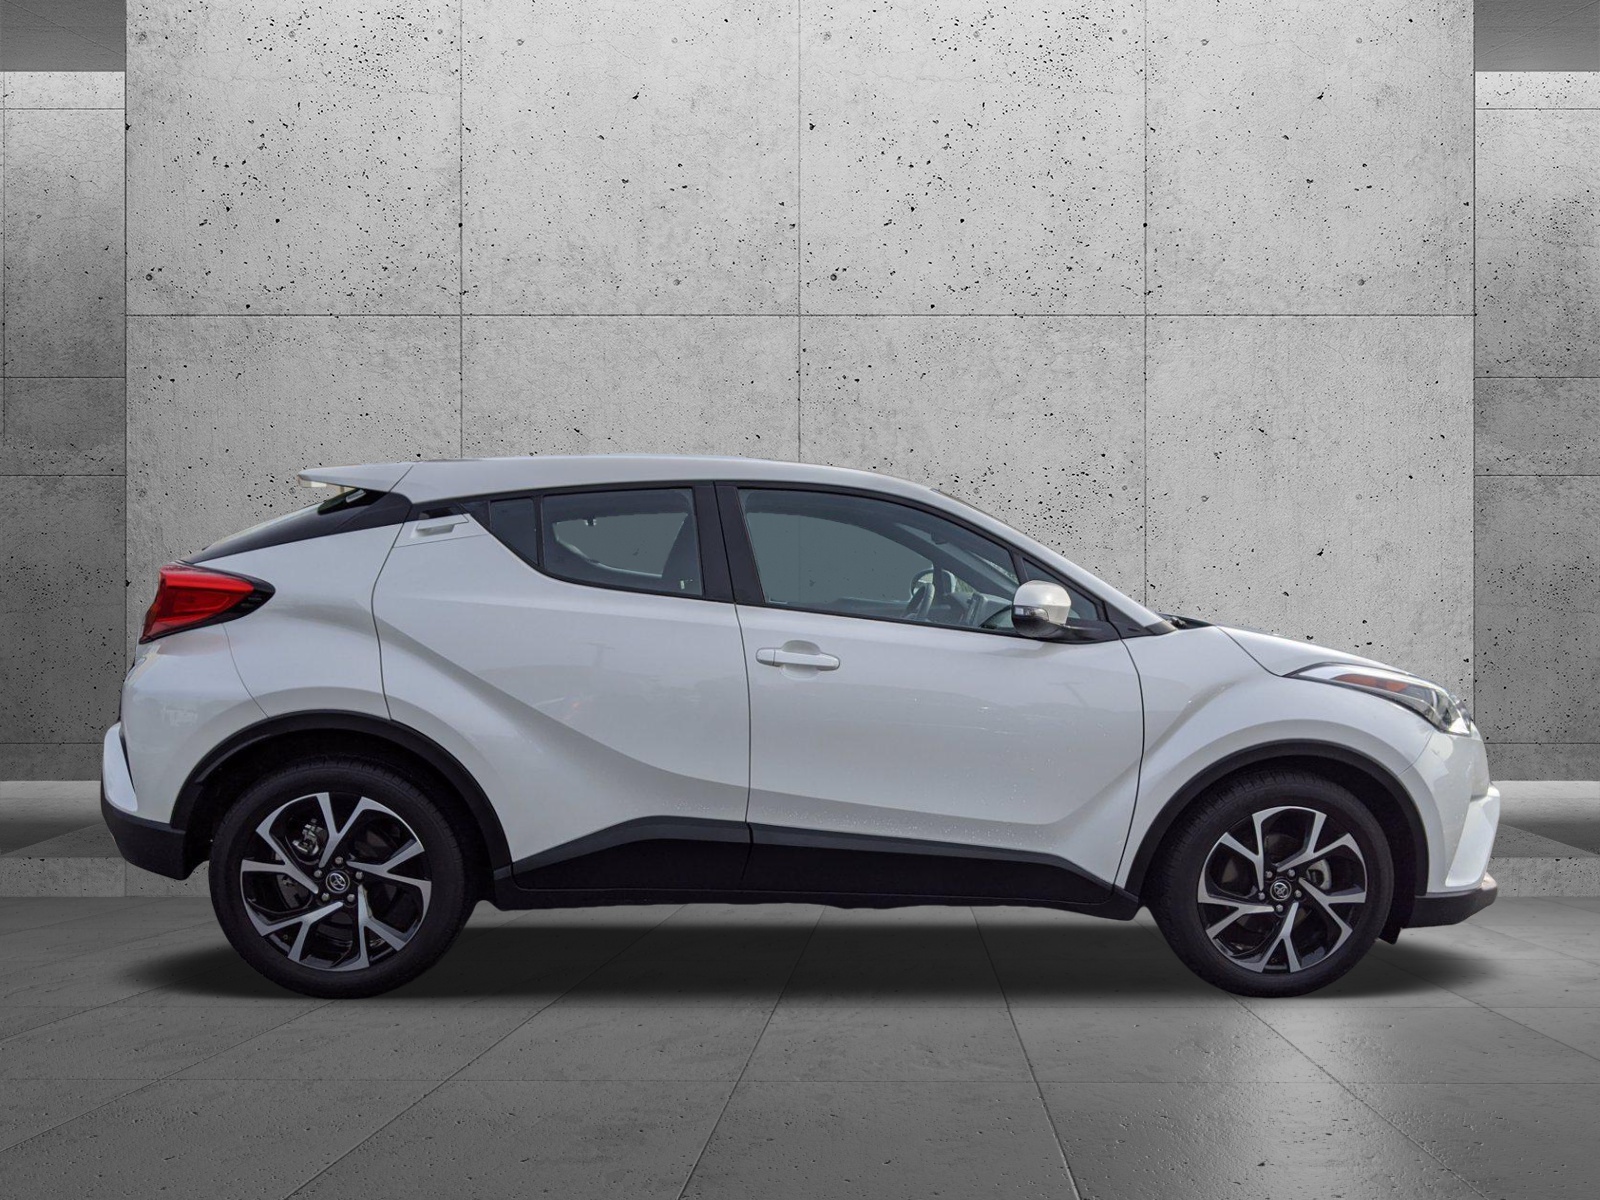 PreOwned 2018 Toyota CHR XLE Sport Utility in Cerritos 